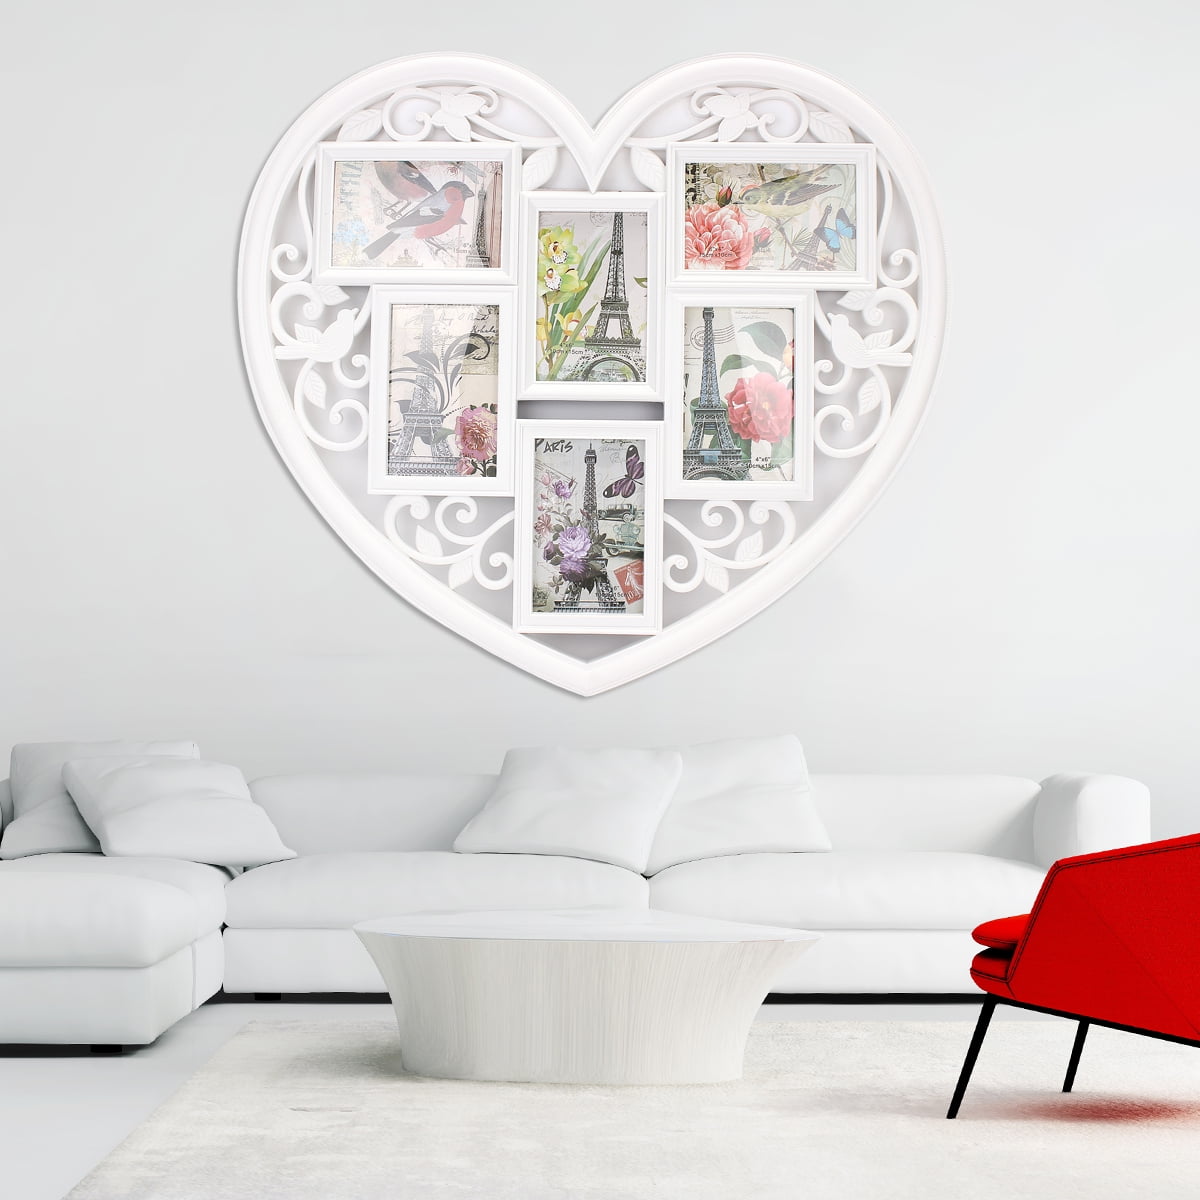 White Love Heart 6 Image Photo Frame Wall Decor Family Wedding Picture Gift 6 Family Photo Frame Picture Frames Art Wall Hanging Album Diy Home Decor Gifts Walmart Canada